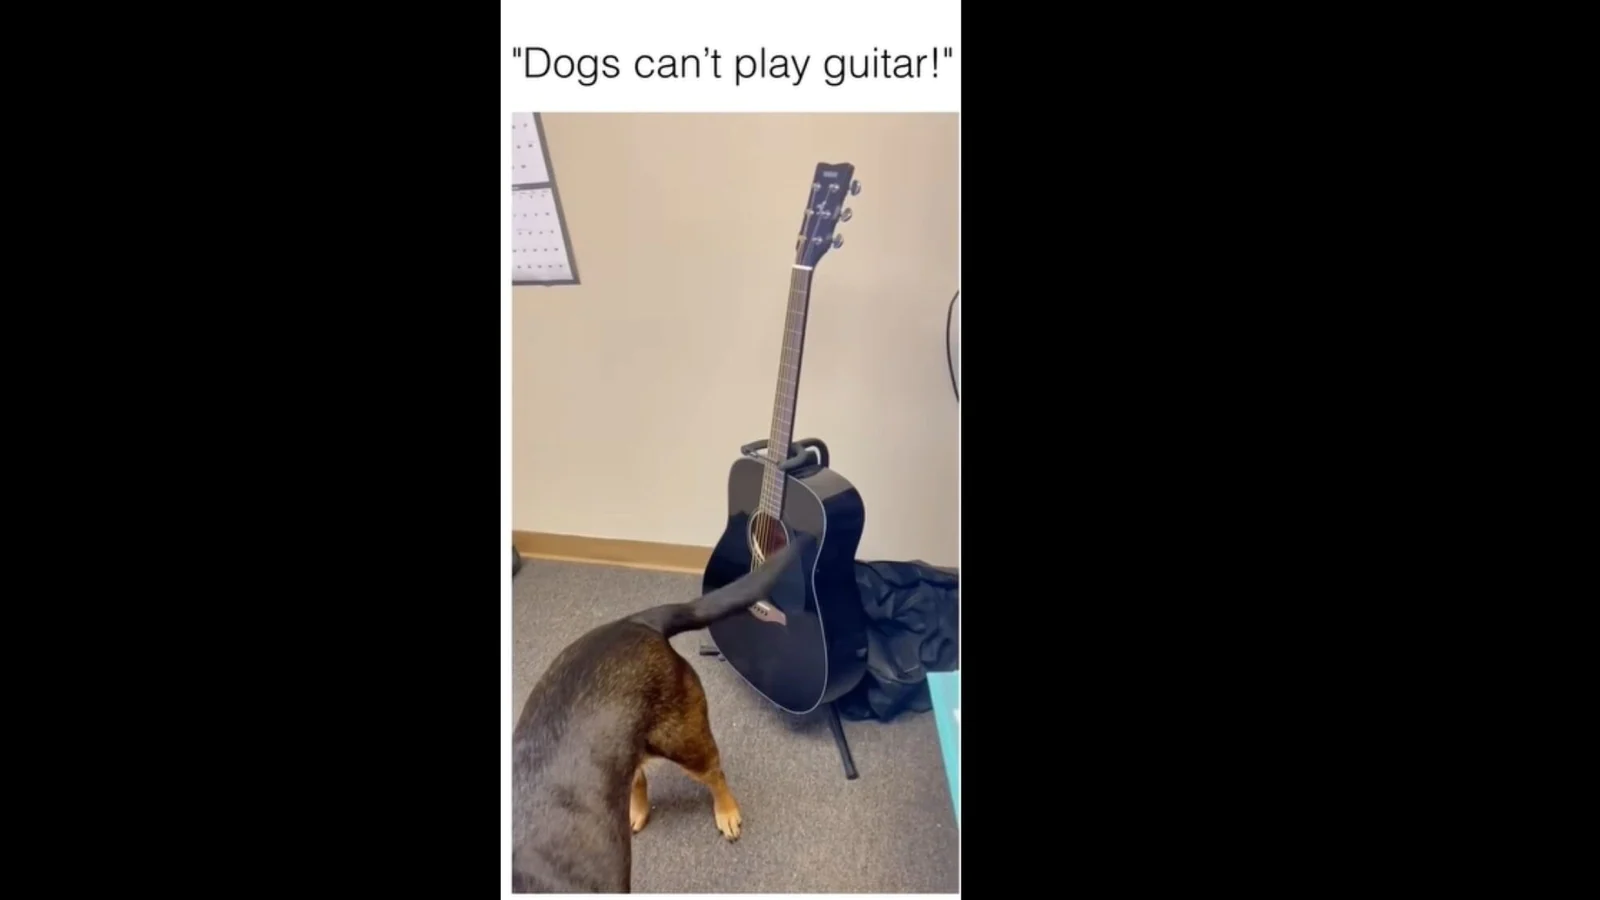 Dog plays the guitar with its tail in adorable video posted on Instagram